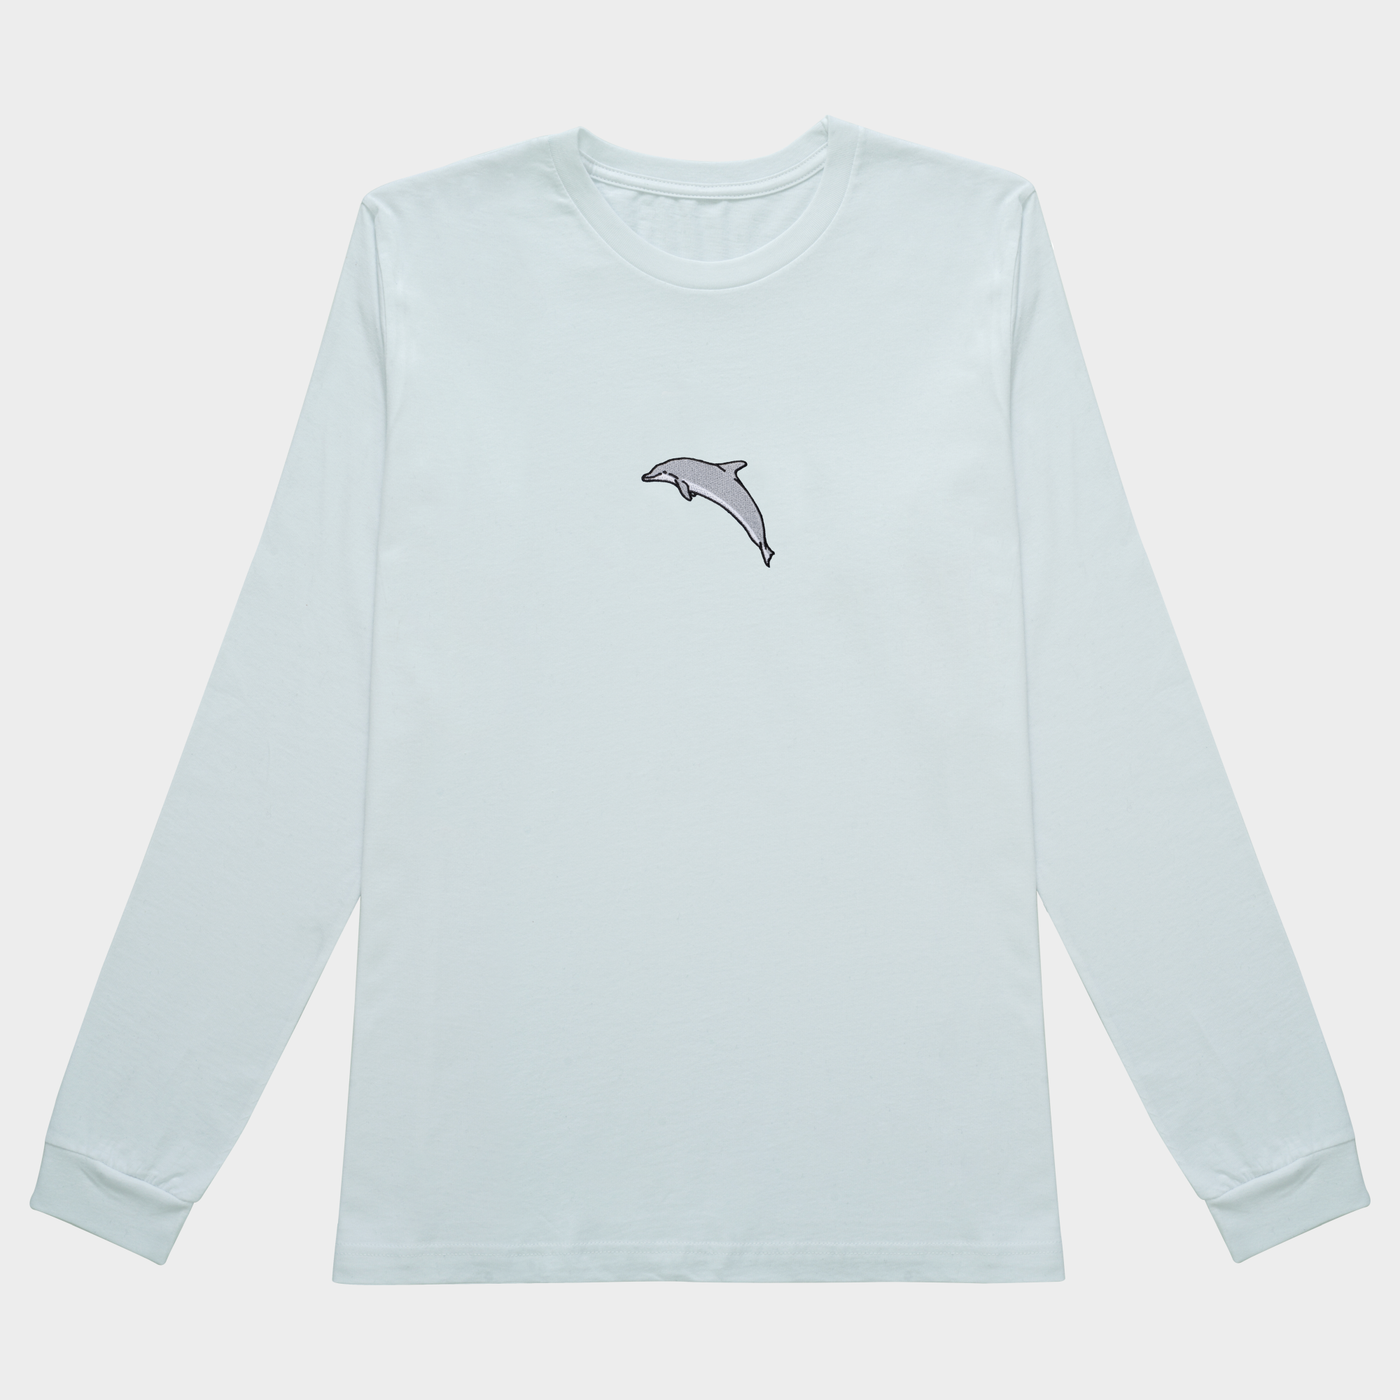 Bobby's Planet Women's Embroidered Dolphin Long Sleeve Shirt from Seven Seas Fish Animals Collection in White Color#color_white